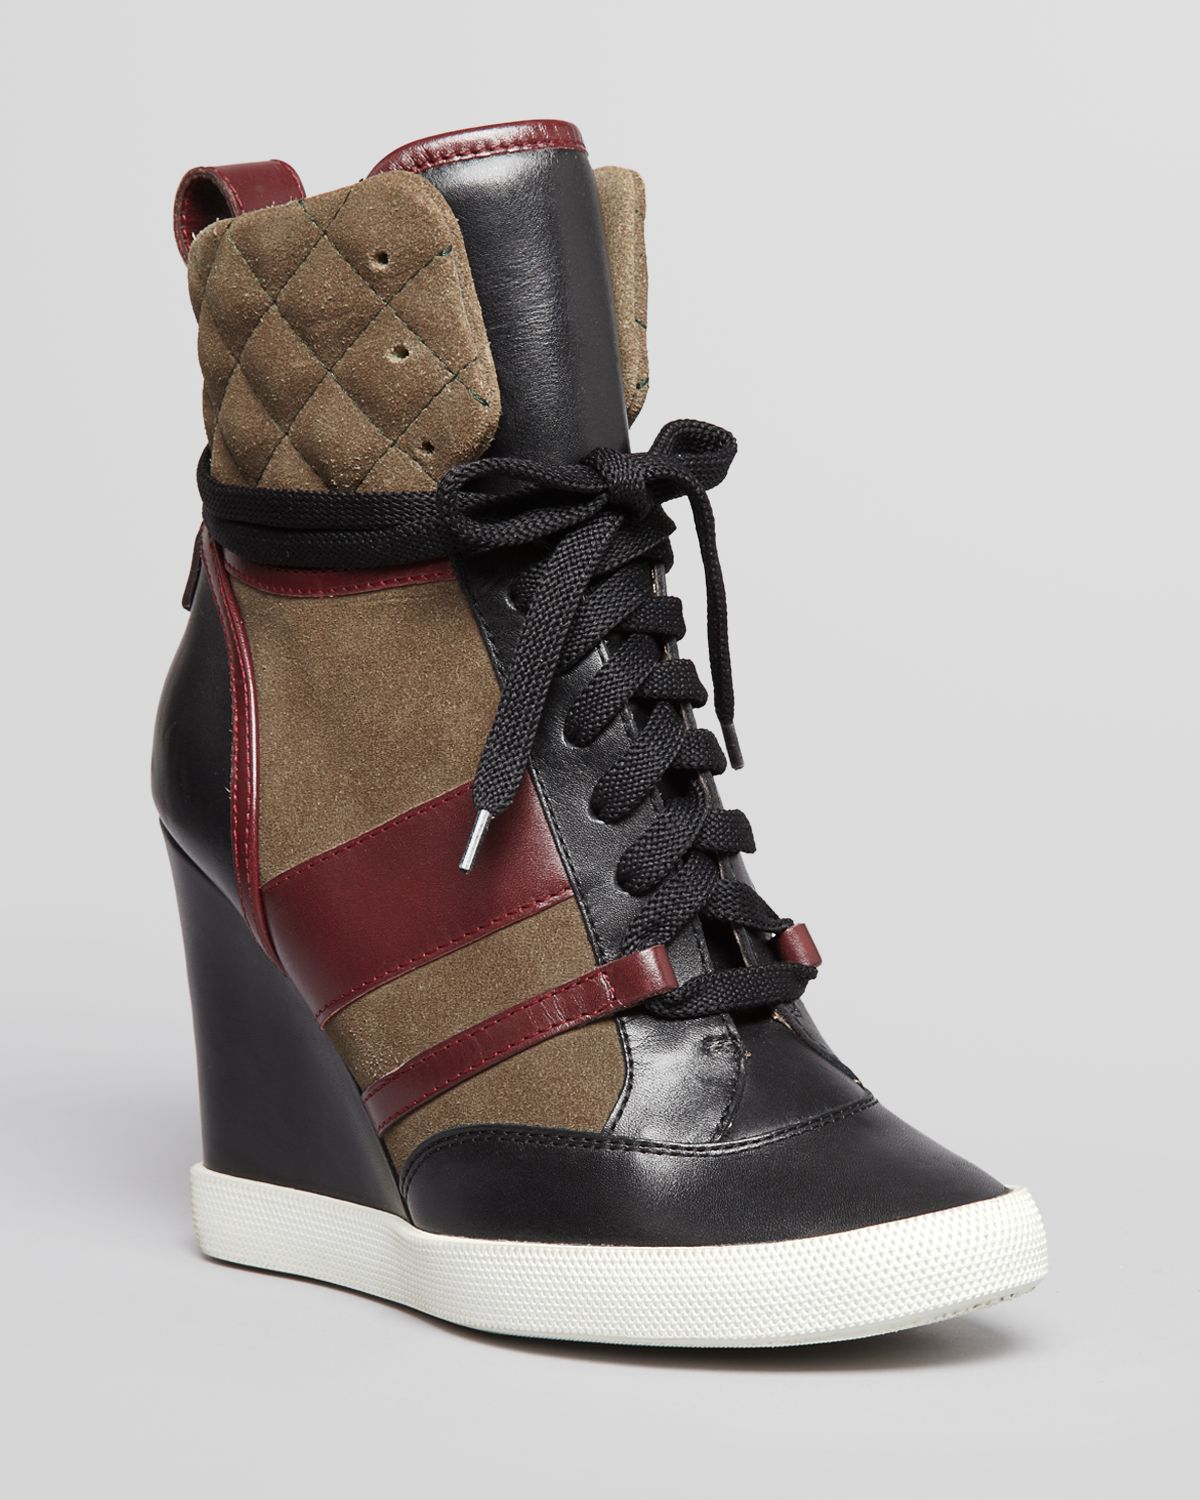 Chloé Lace Up High Top Wedge Sneakers Kasia in Black/Bordeaux/Olive (Black)  | Lyst